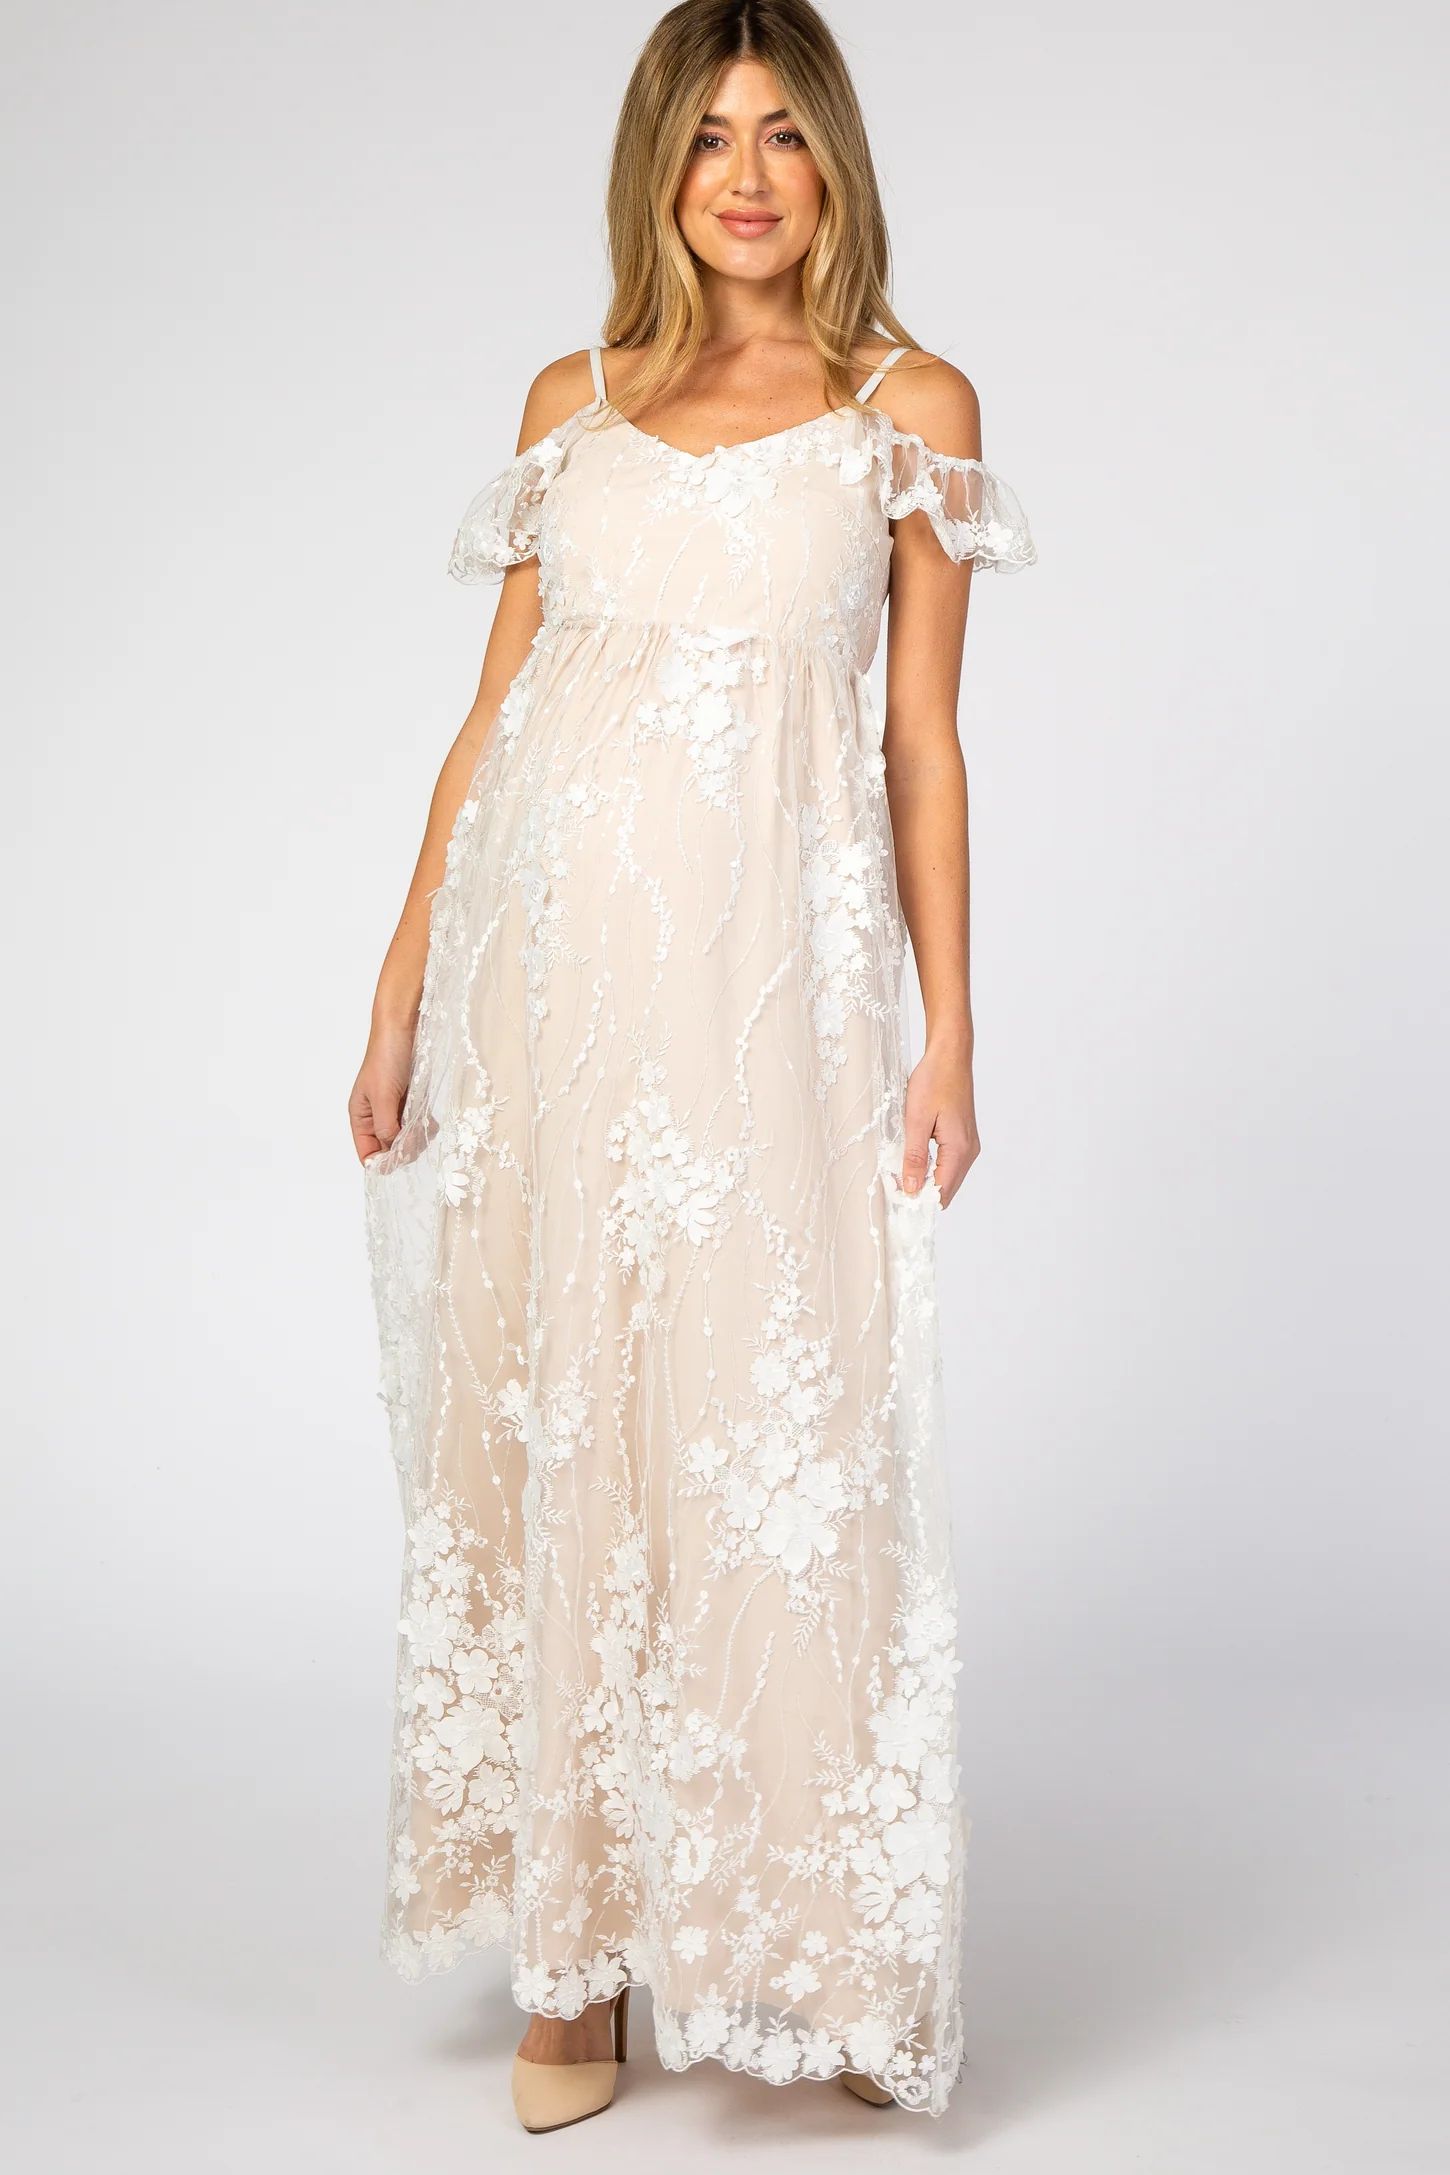 Ivory Floral Embroidered Mesh Maternity Evening Gown | PinkBlush Maternity